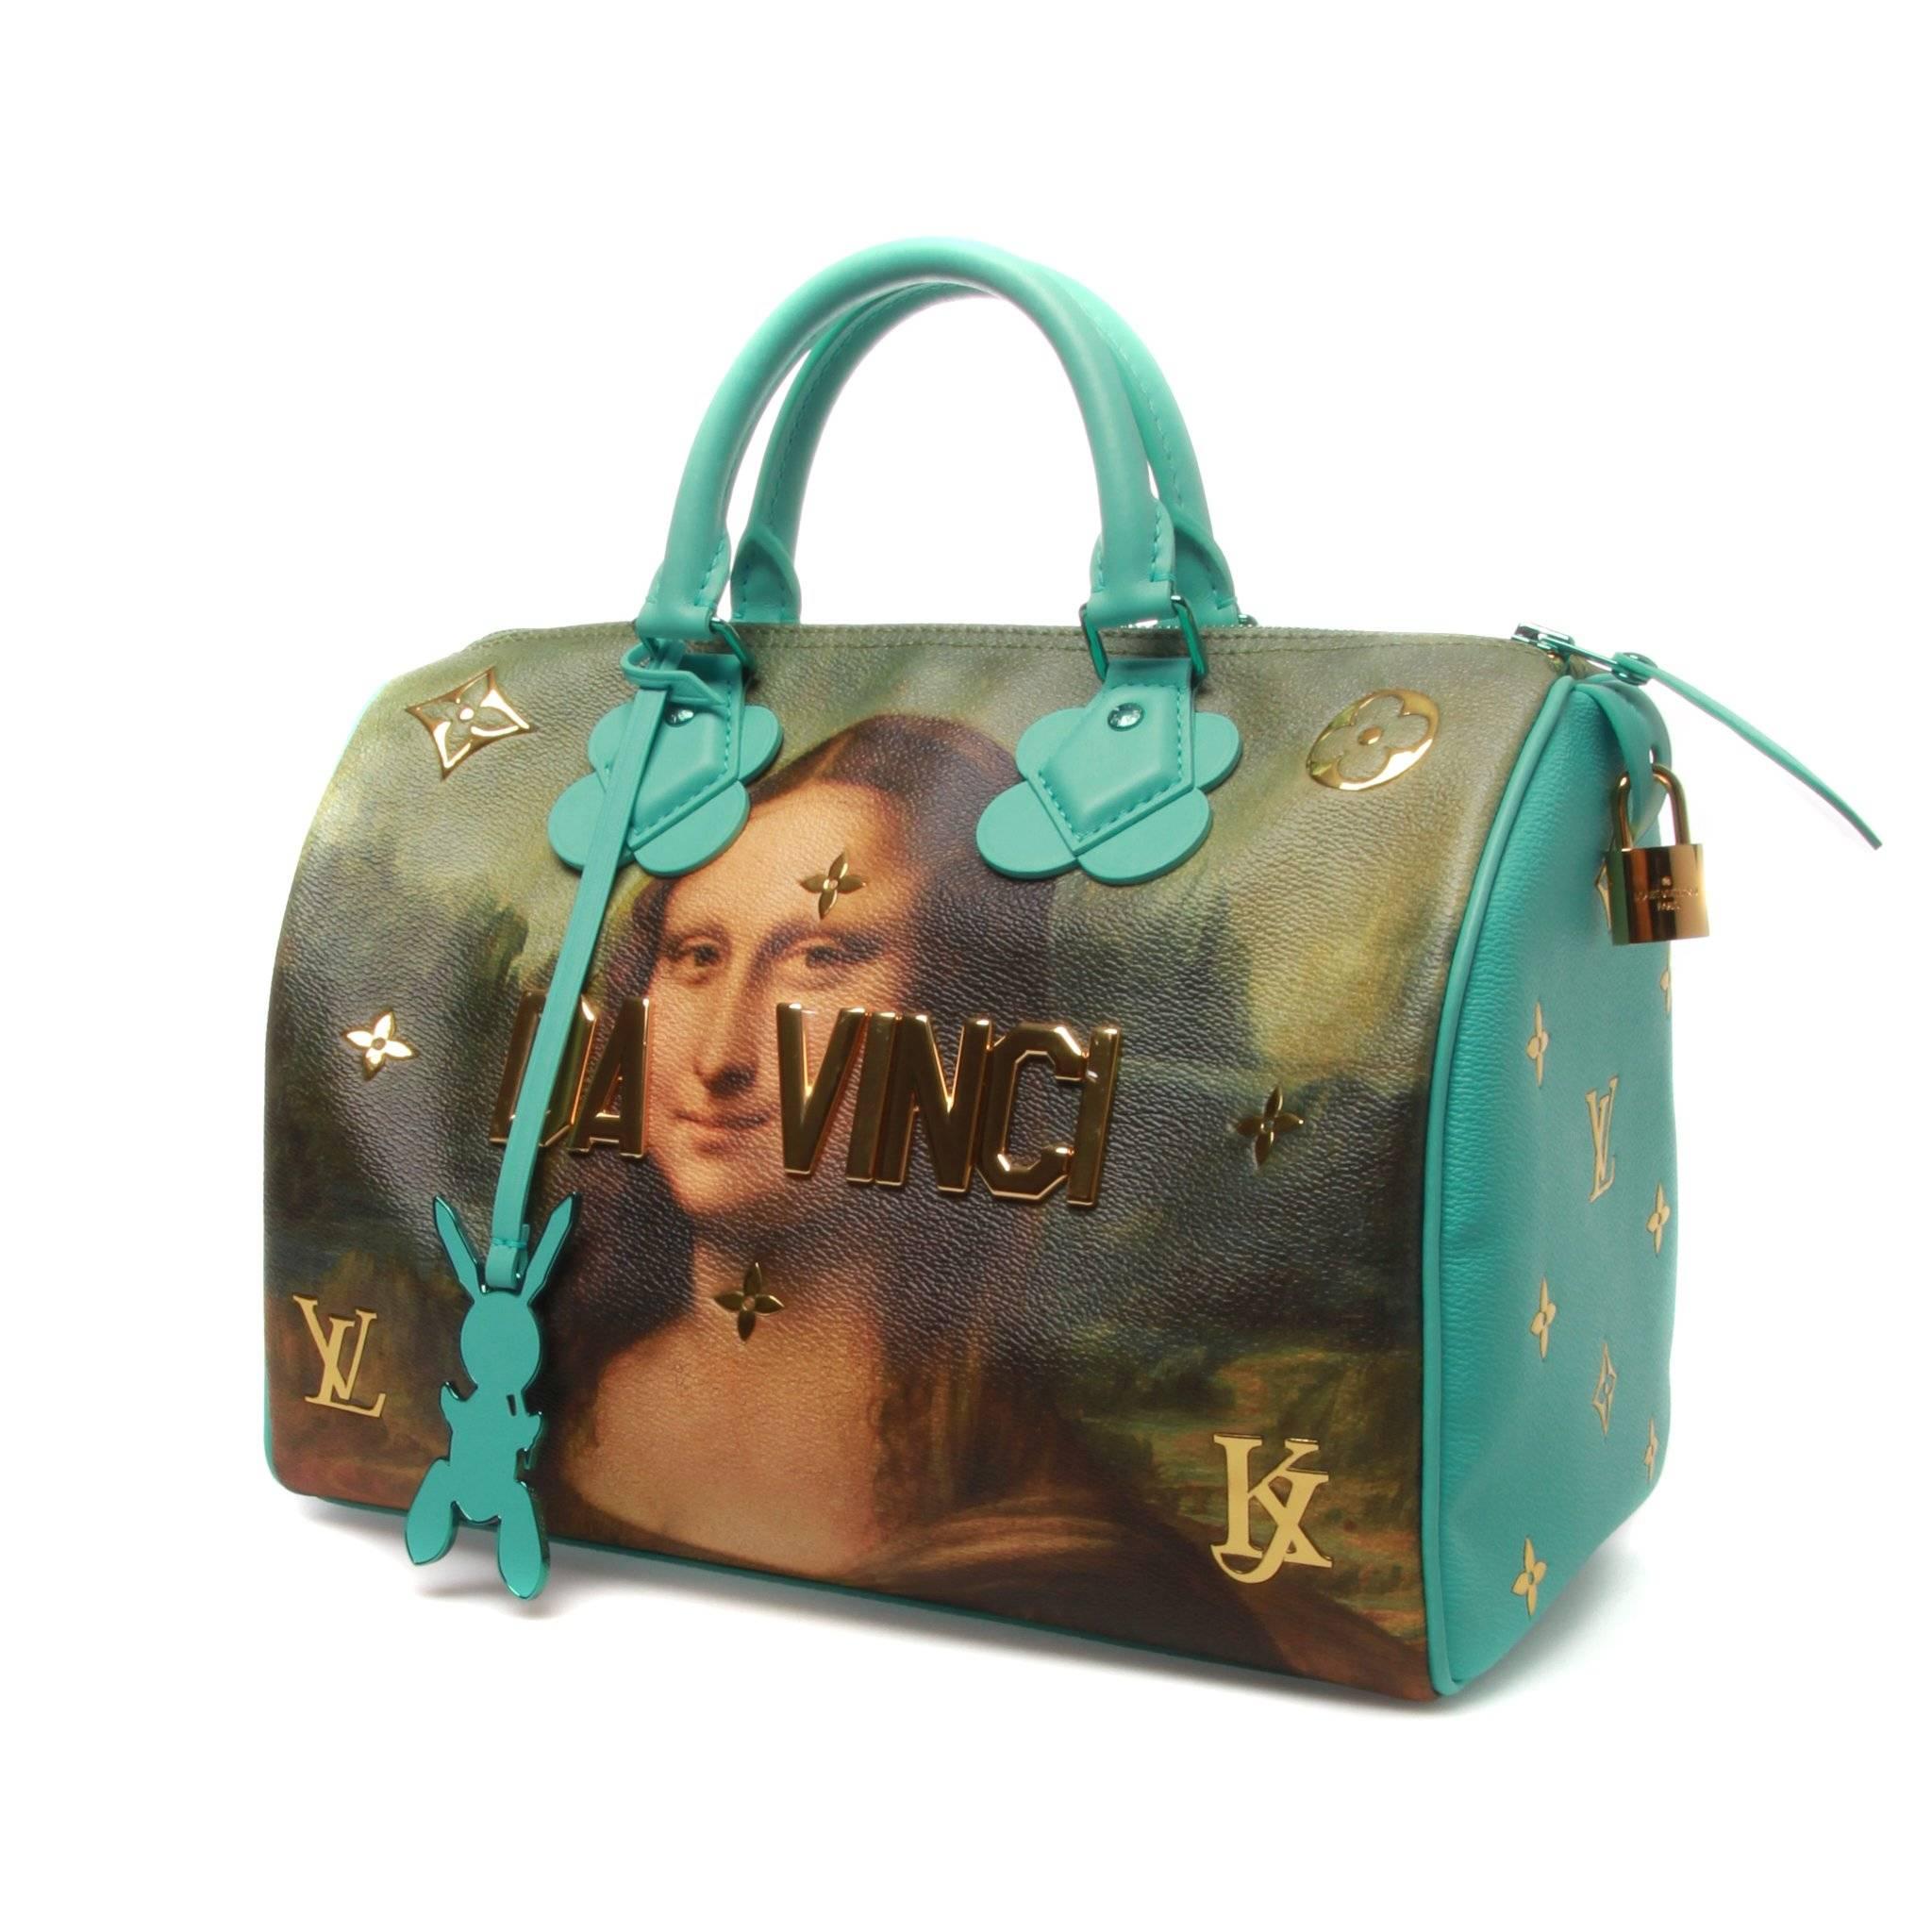 Classic Speedy 30 sporting the classic master that is Da Vinci's Mona Lisa. Expressed here in the 'Vert d'Eau' colourway. 

Gold Monogram serti, flower shapes, reflective metallic letters and colored trimmings. An exclusive leather lining embossed,